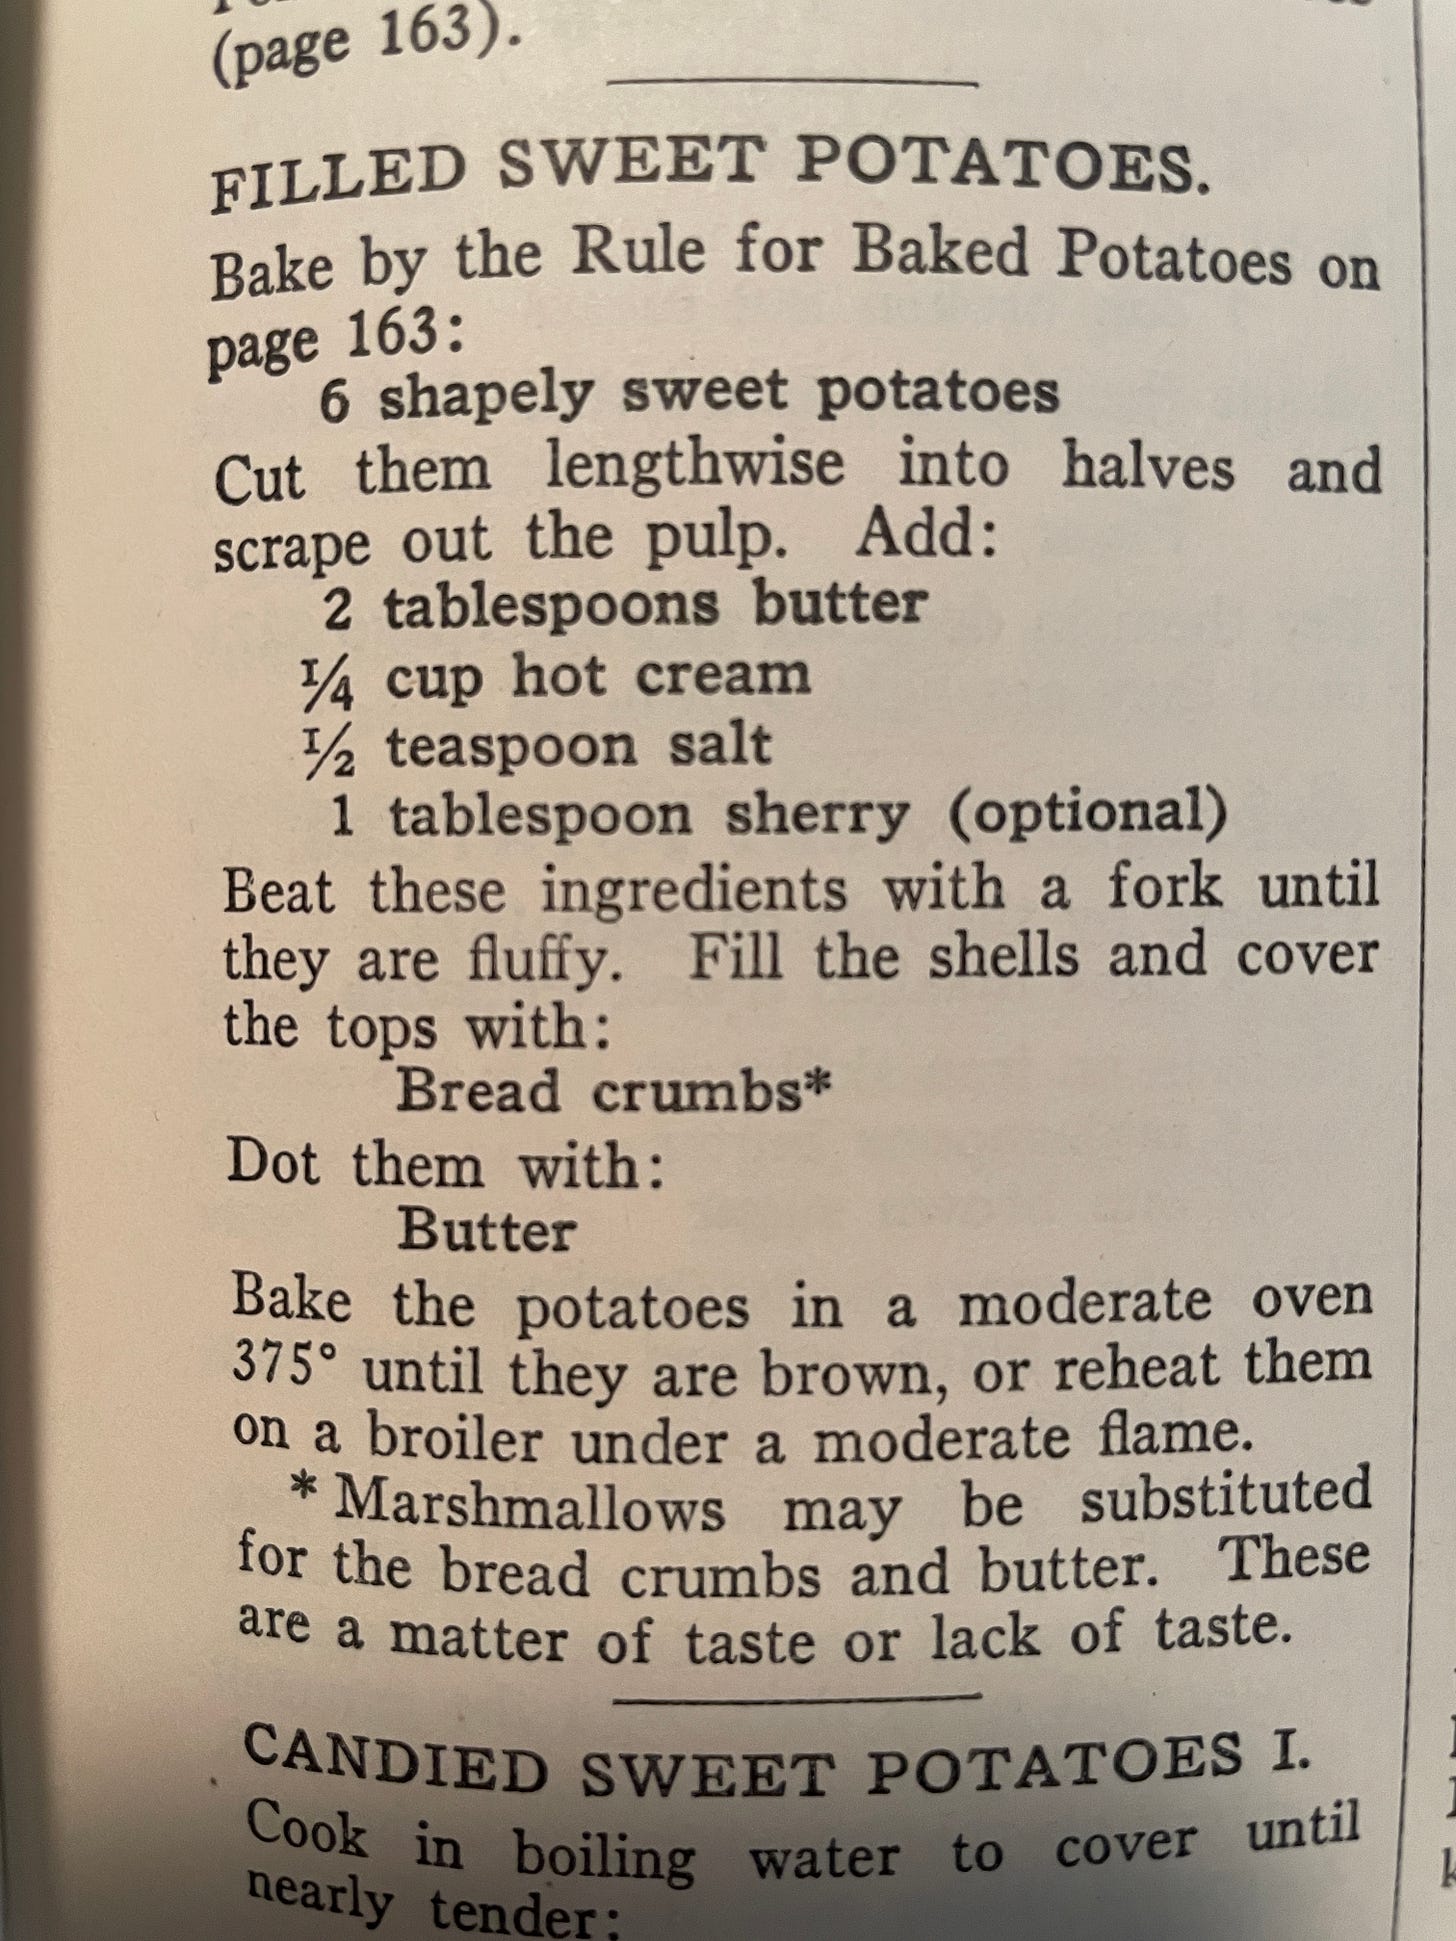 A photo of a recipe from the 1936 Joy of Cooking for "Filled Sweet Potatoes"